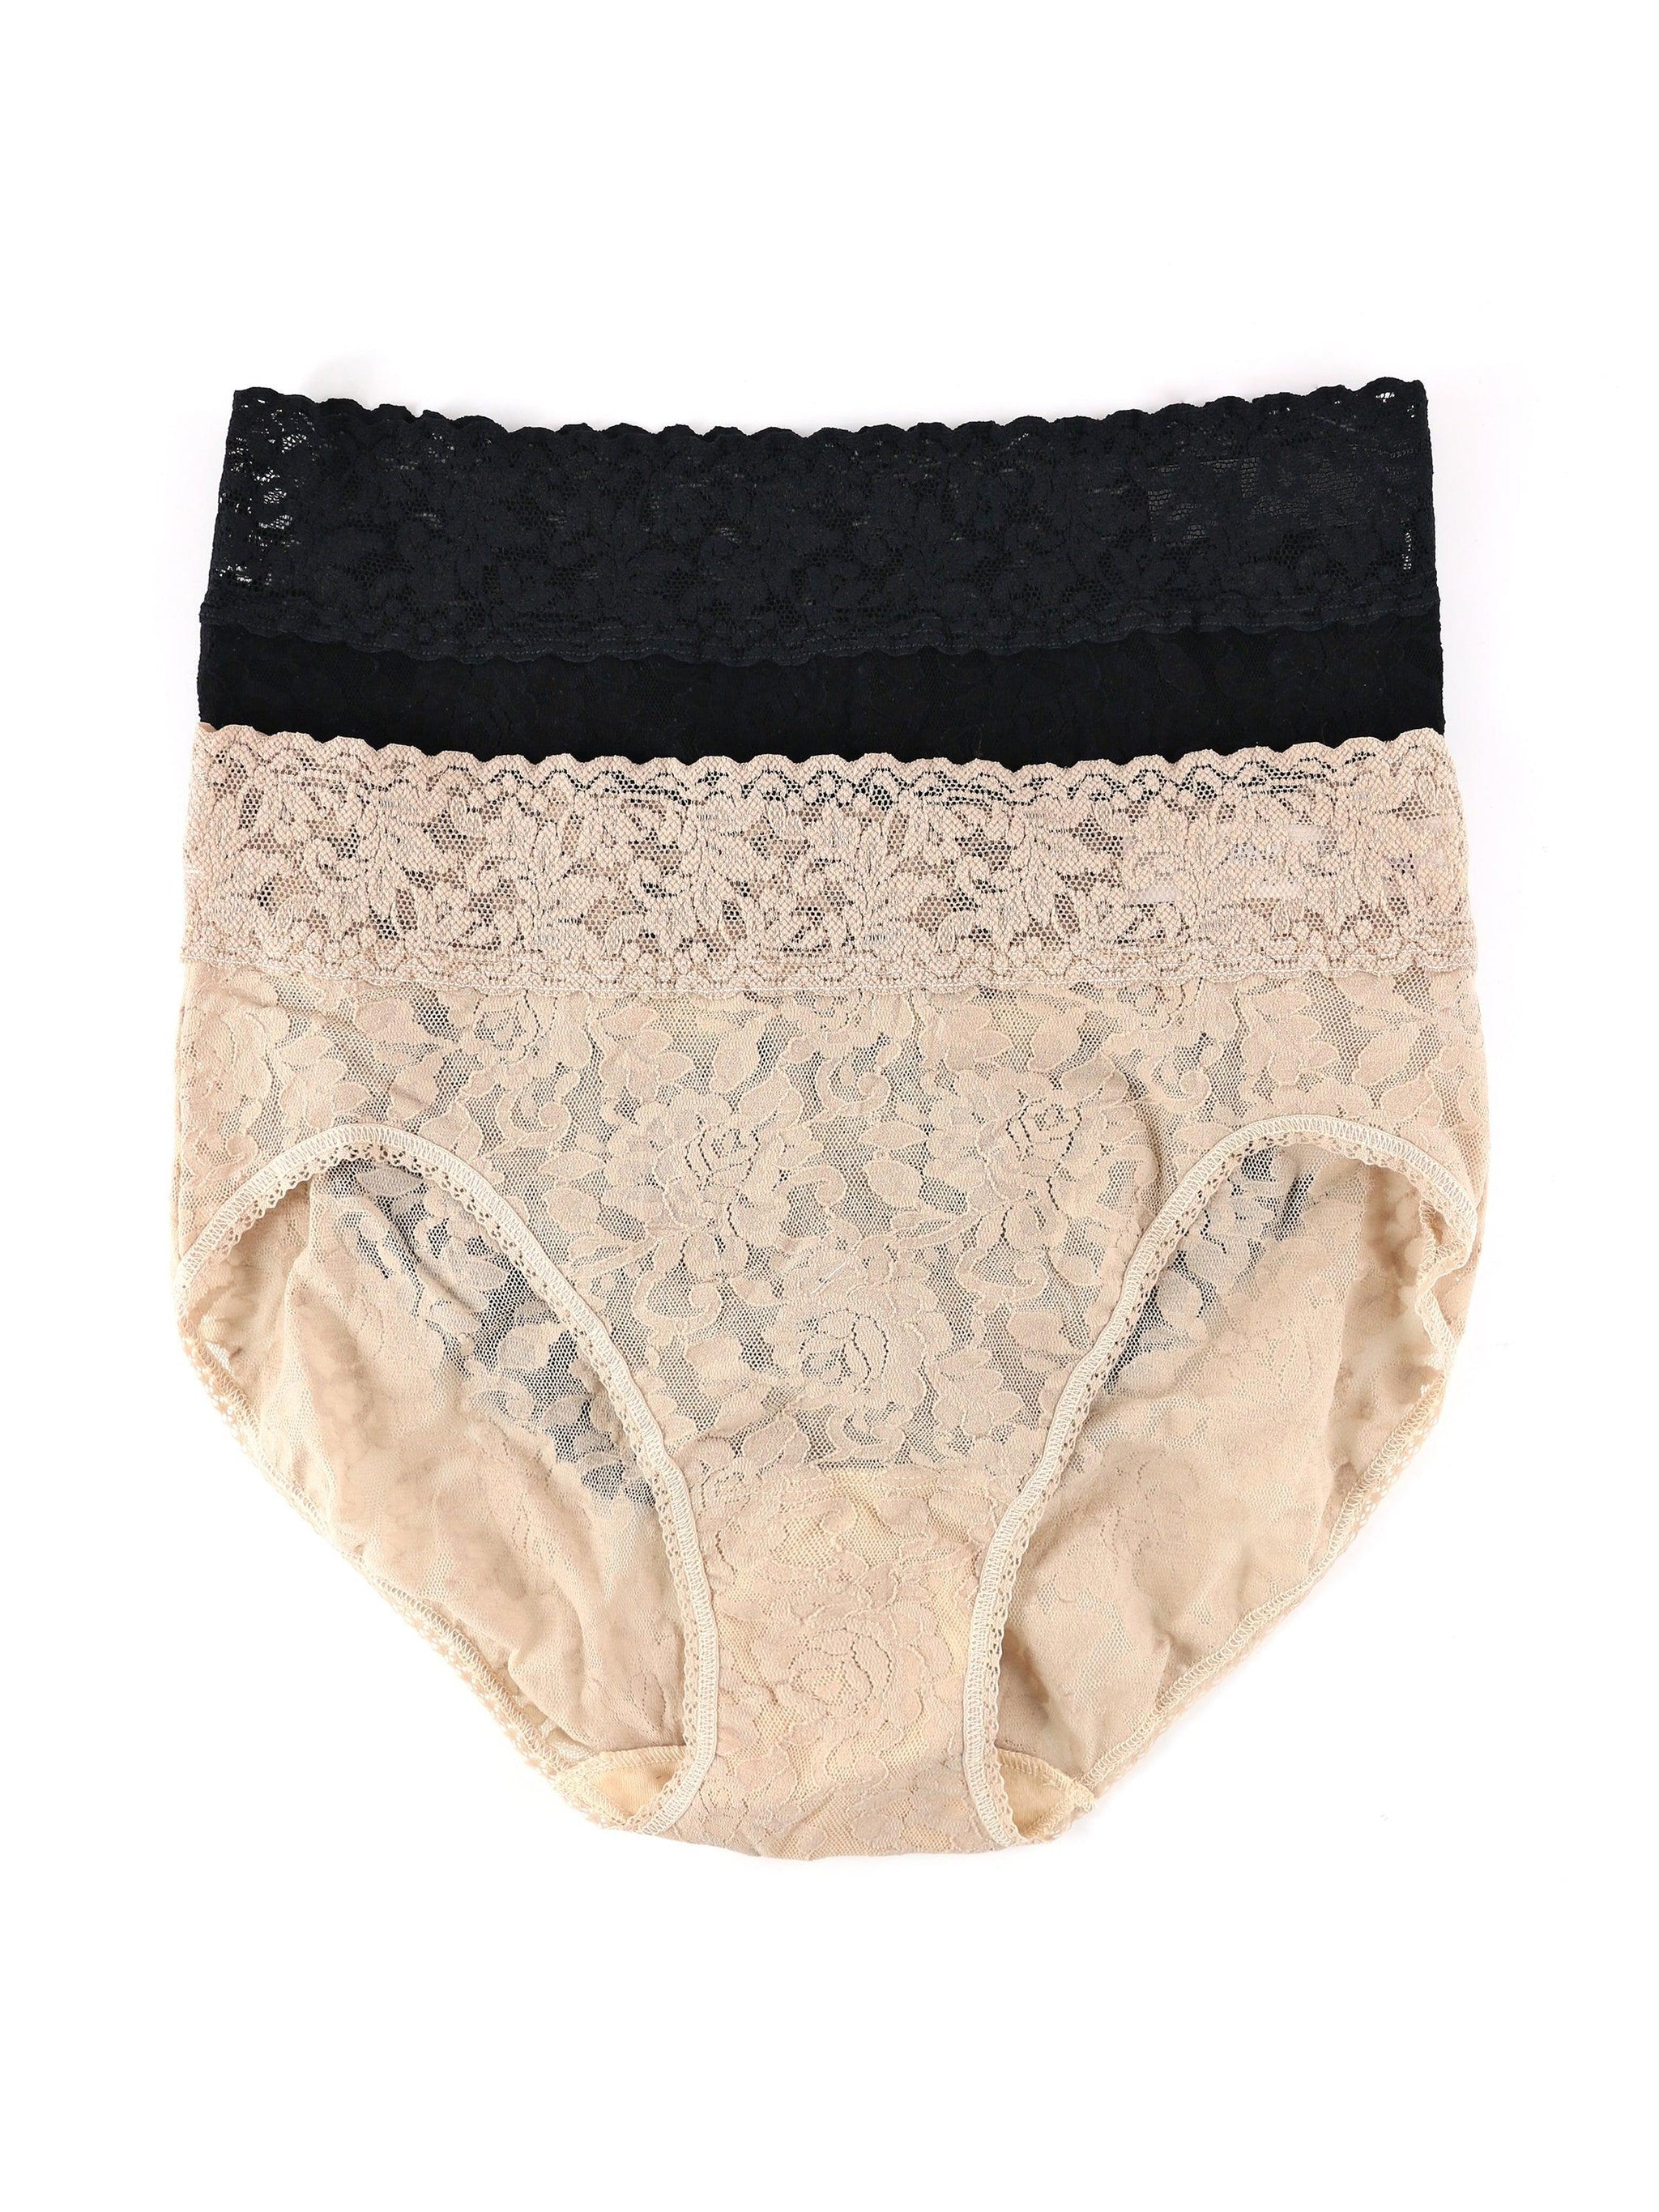 hanky panky, Signature Lace Vkini, Chai, Black, White, Xsmall, Full  Coverage Underwear for Women, Comfortable and Durable, Sizes from S to XL,  Everyday Wear at  Women's Clothing store